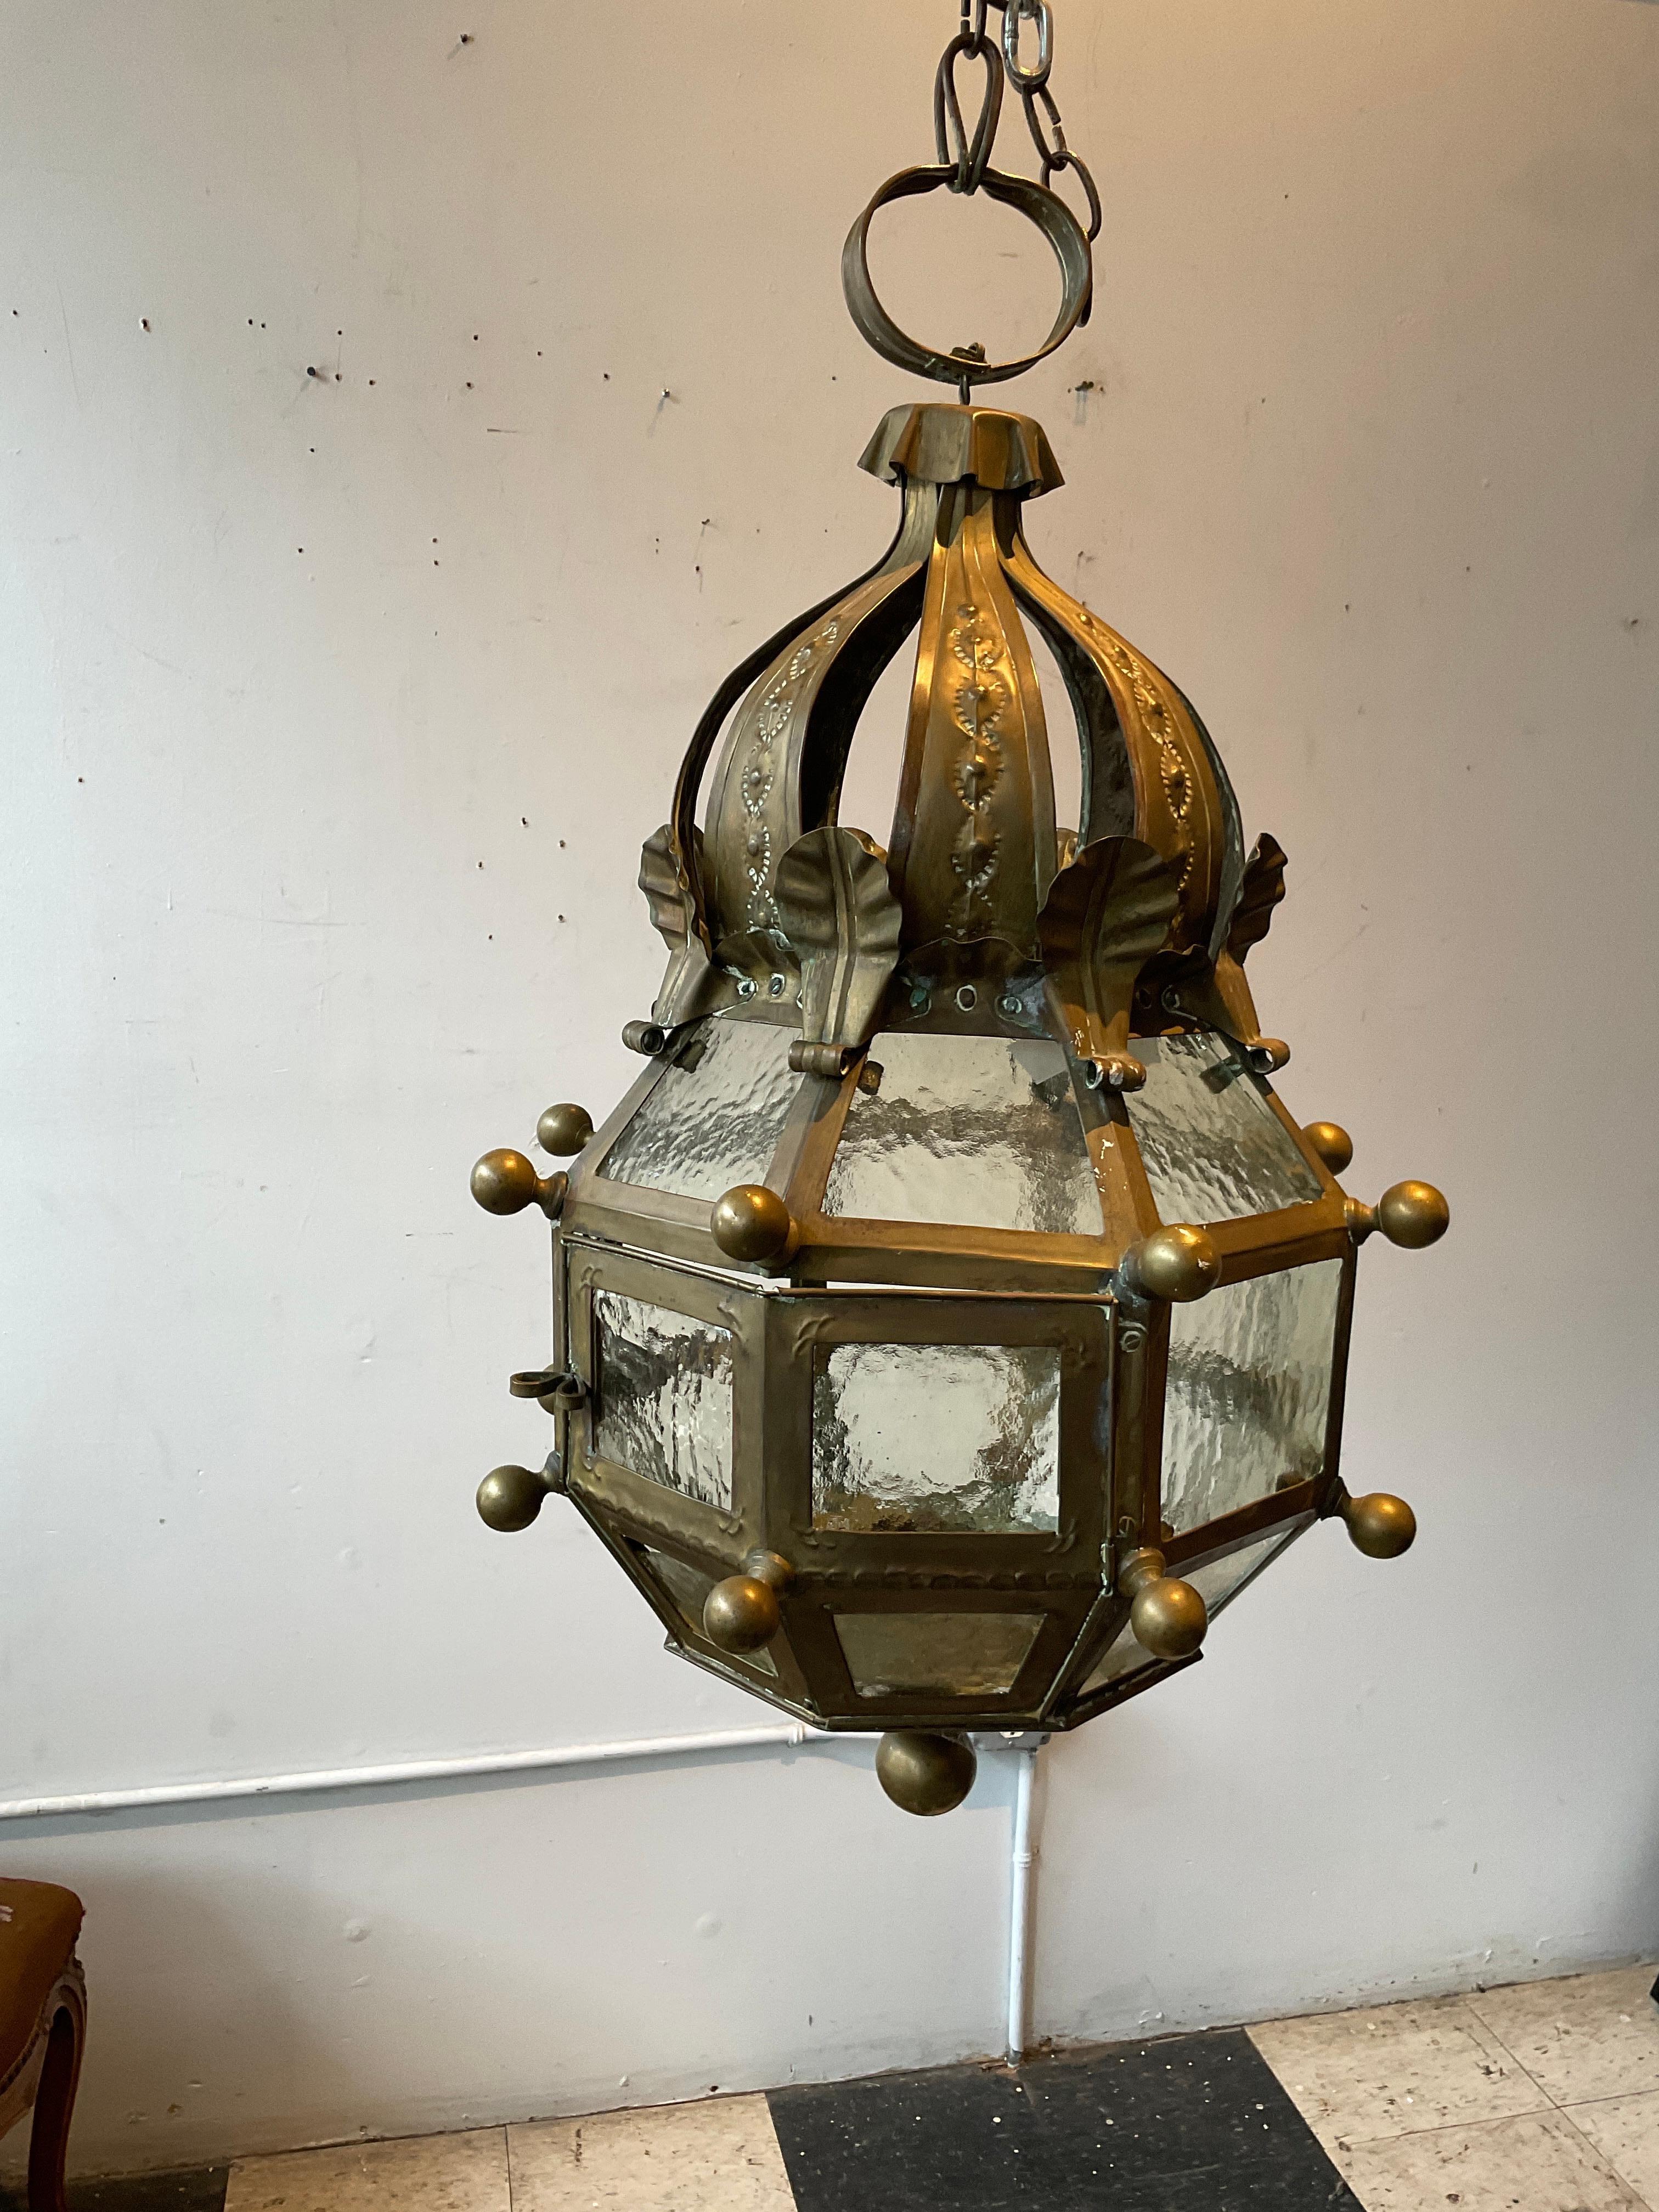 1940s Brass and glass lantern with Vaseline glass. This is meant for a candle, but if brought to an electrician, they can wire it for electricity. Presently only used for candles.
One piece of glass has a piece broken off.
One fastener is missing